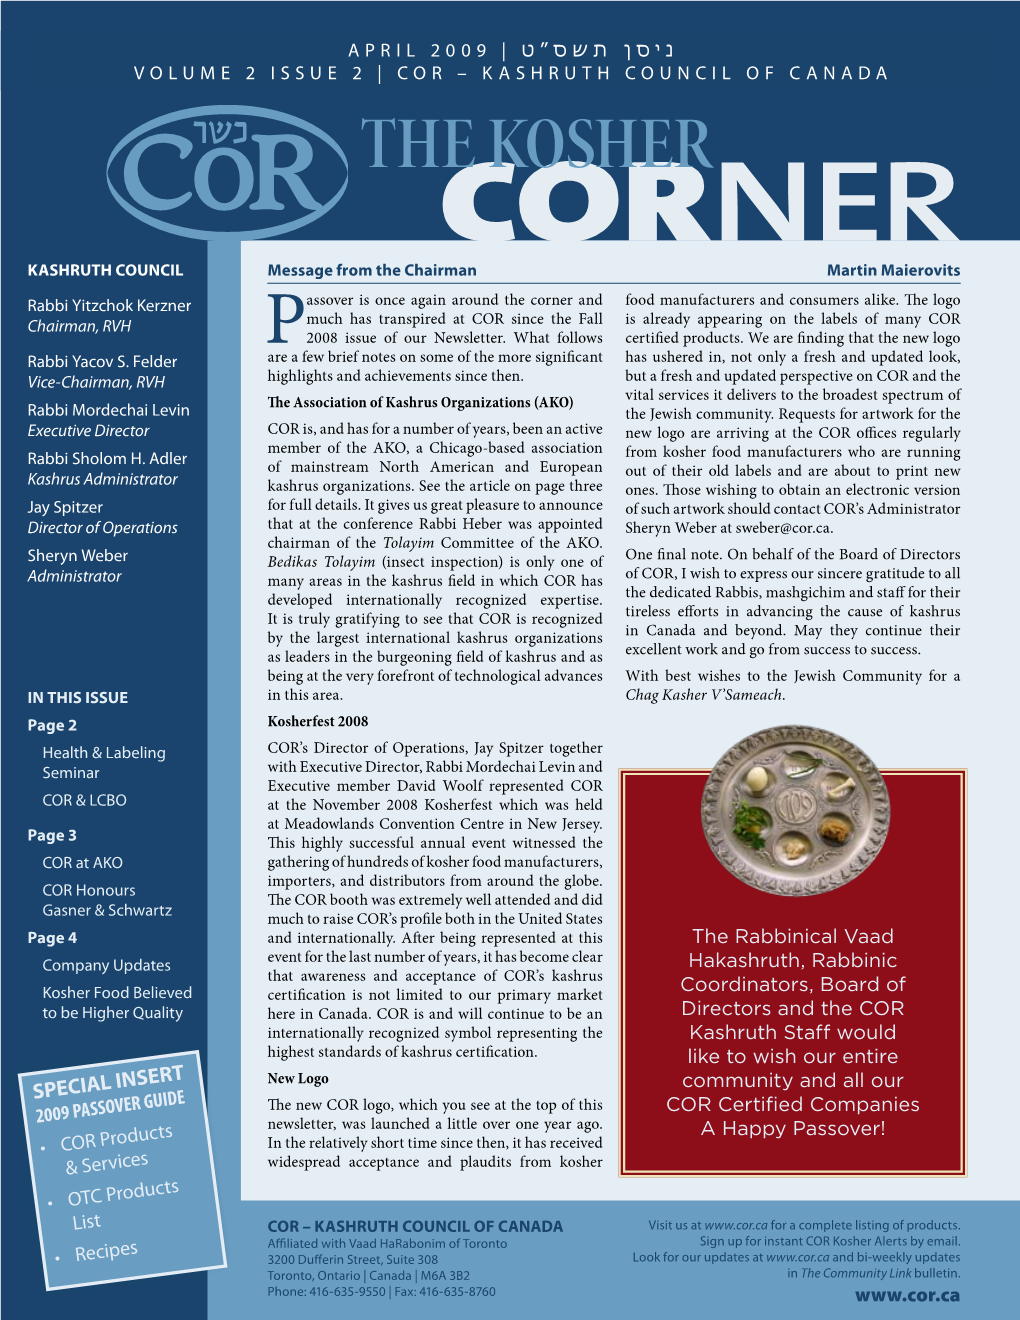 SPECIAL INSERT the New COR Logo, Which You See at the Top of This COR Certified Companies 2009 PASSOVER GUIDE Newsletter, Was Launched a Little Over One Year Ago